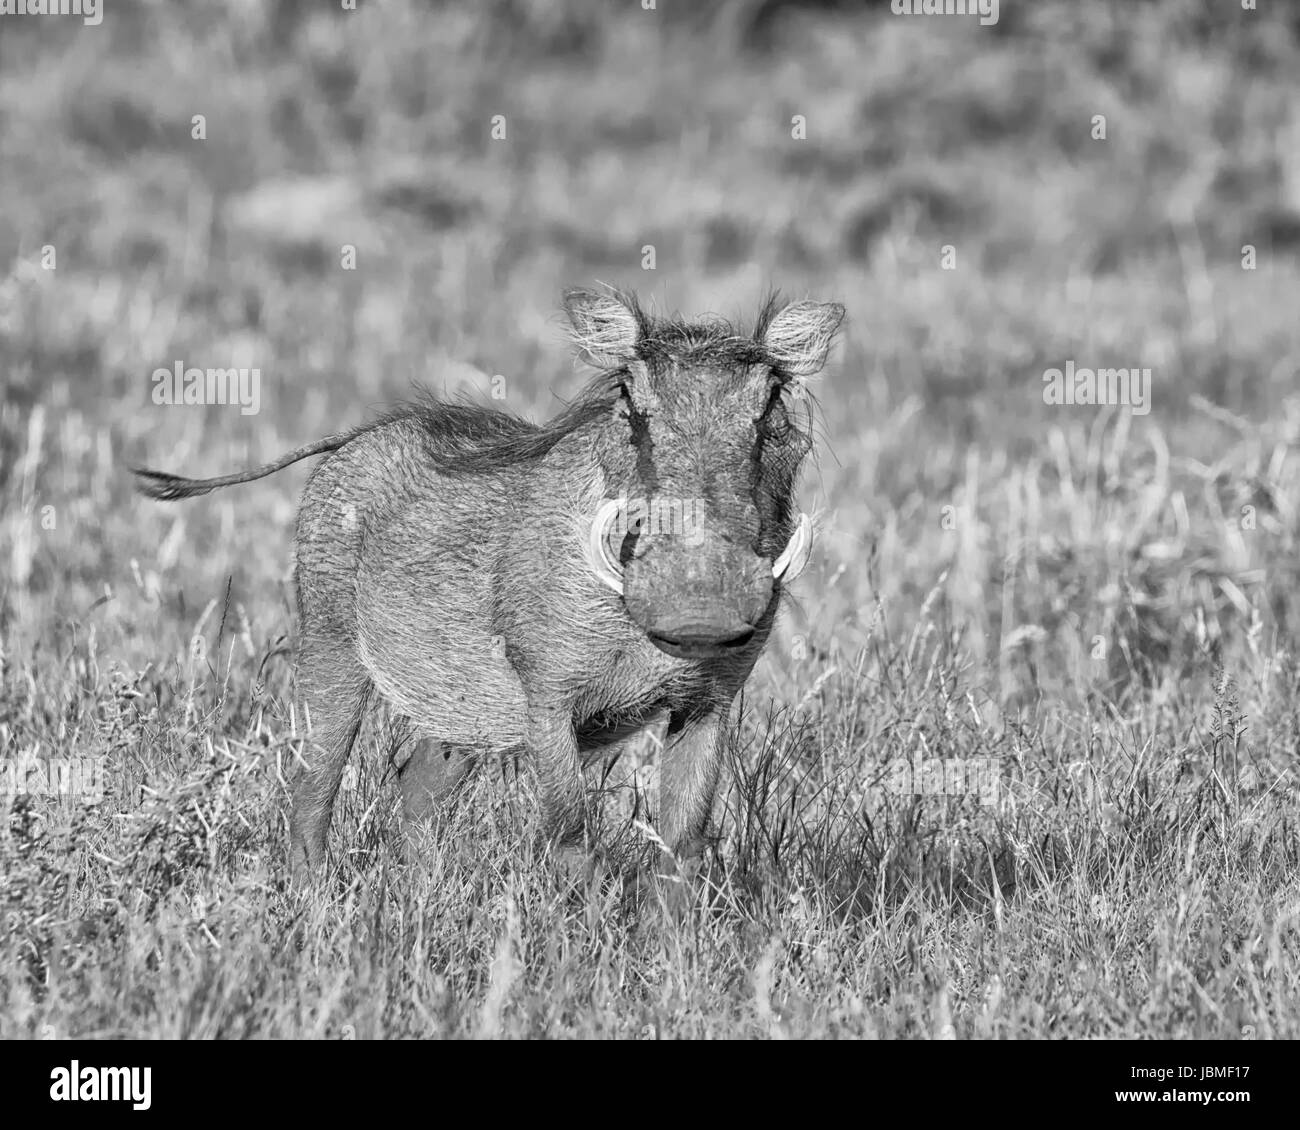 A close-up portrait of a Warthog in Southern African savannah Stock Photo